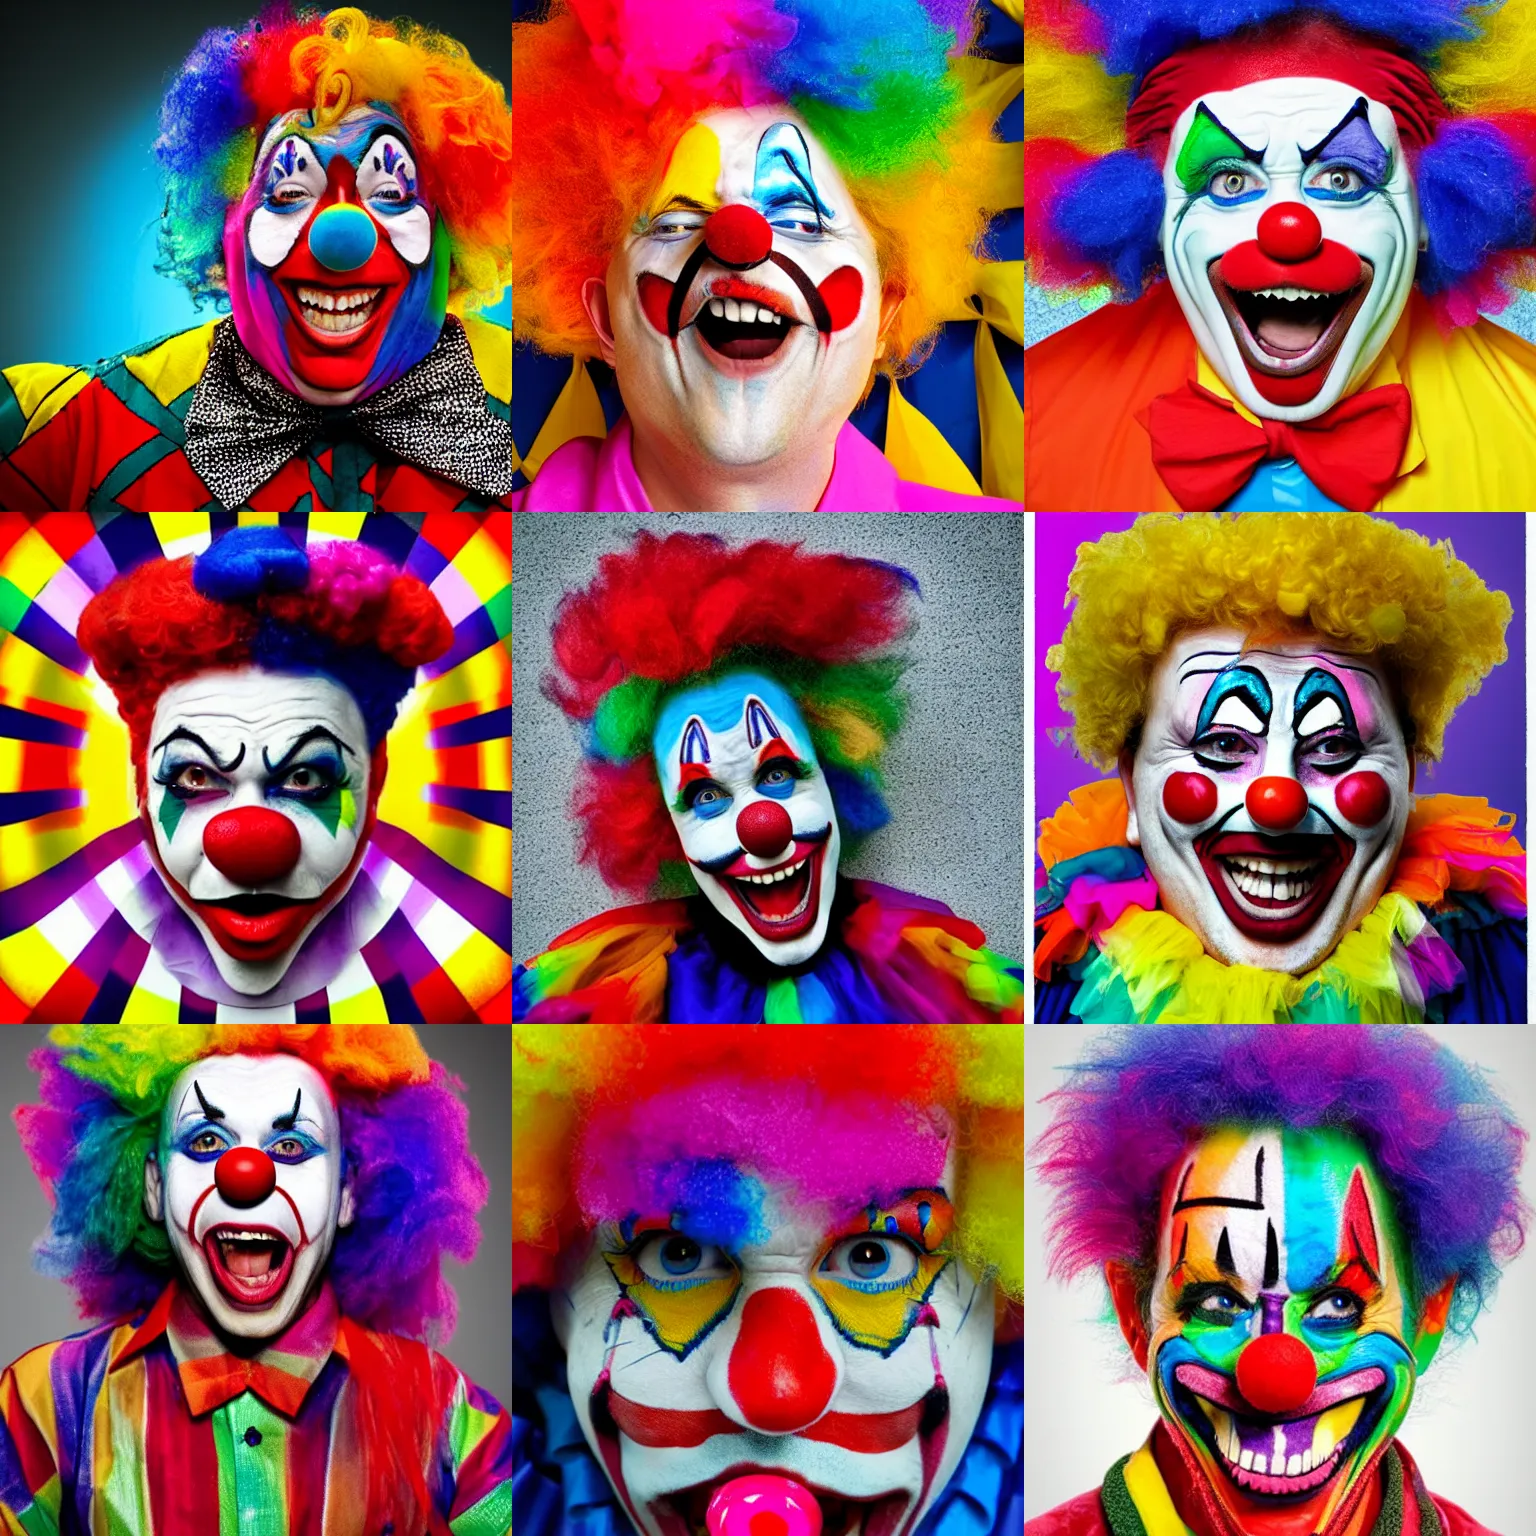 Prompt: A colorful clown, crazy, funny, stupid